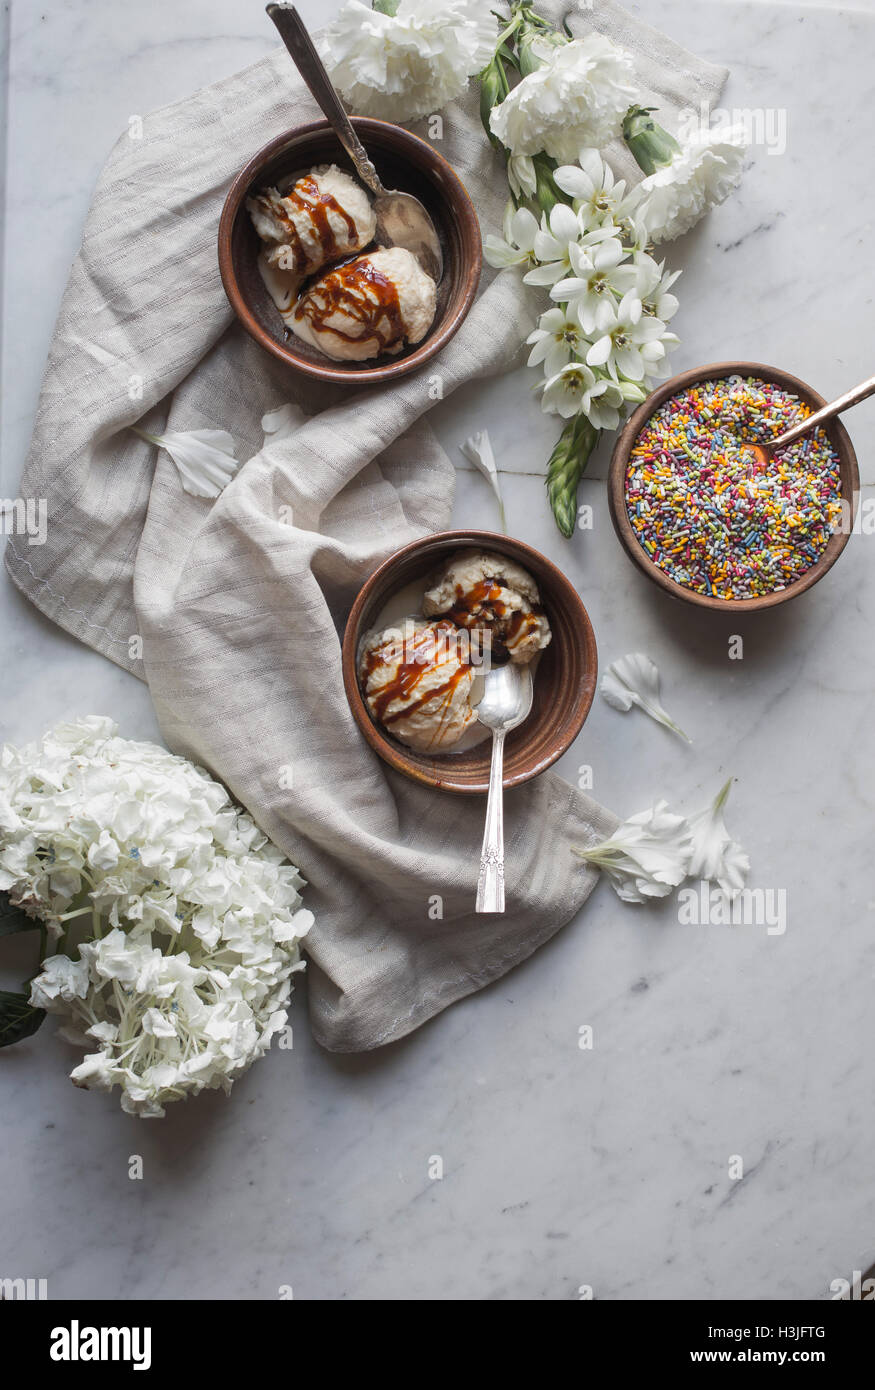 Jaggery Ice Cream with flowers Stock Photo